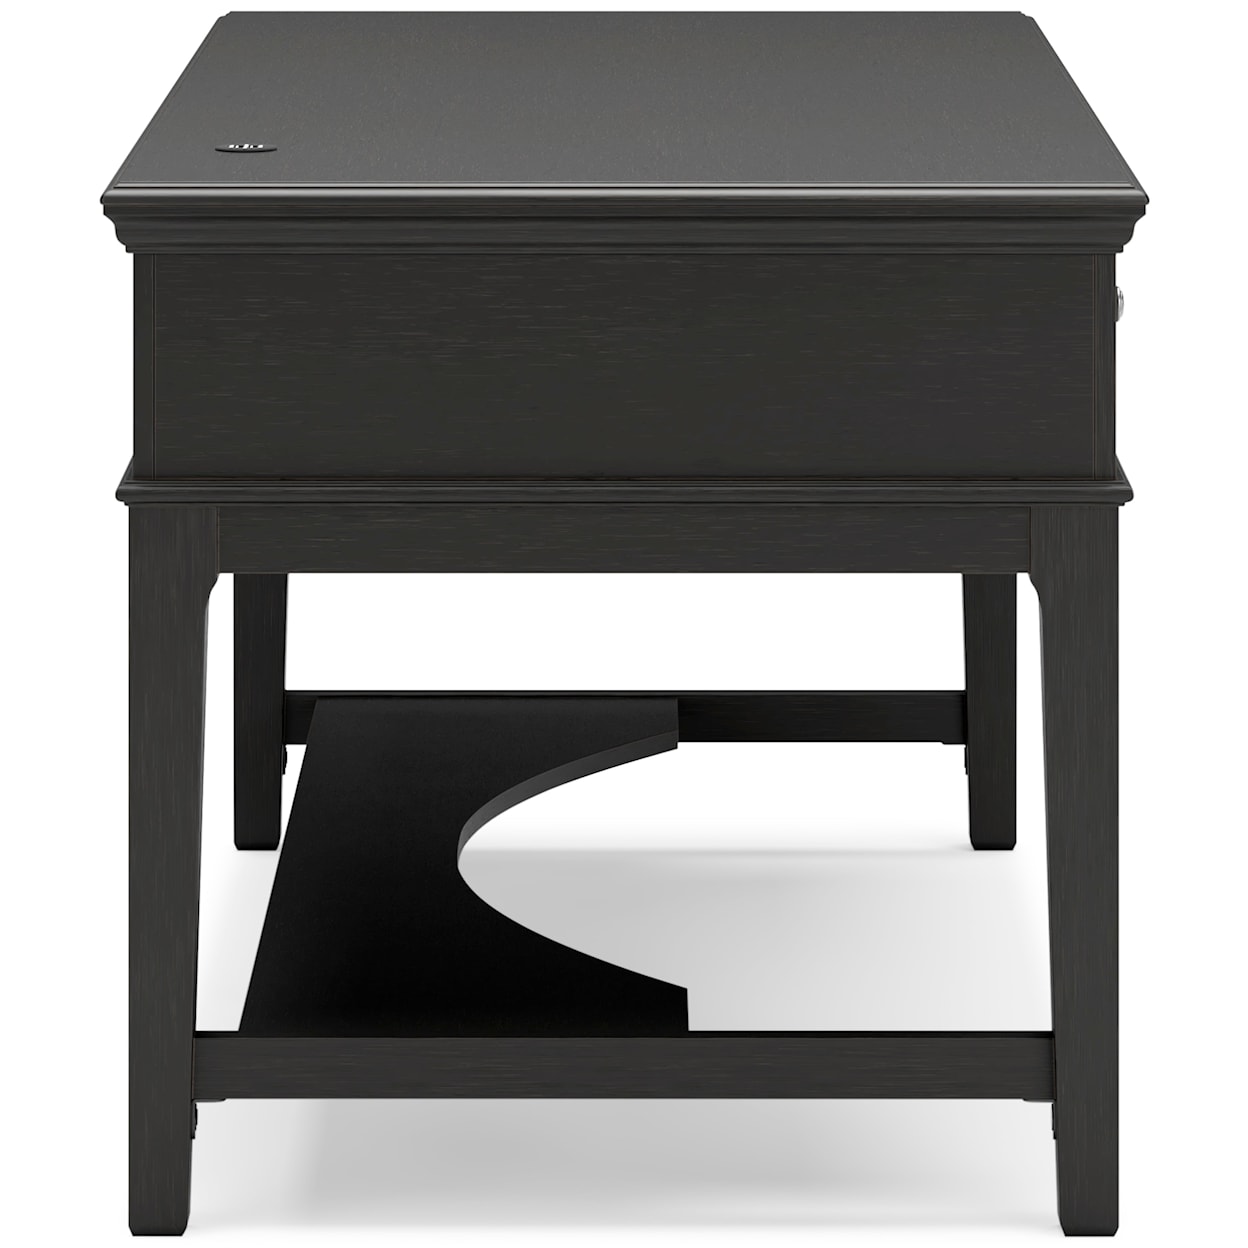 Signature Design by Ashley Beckincreek 60" Home Office Desk